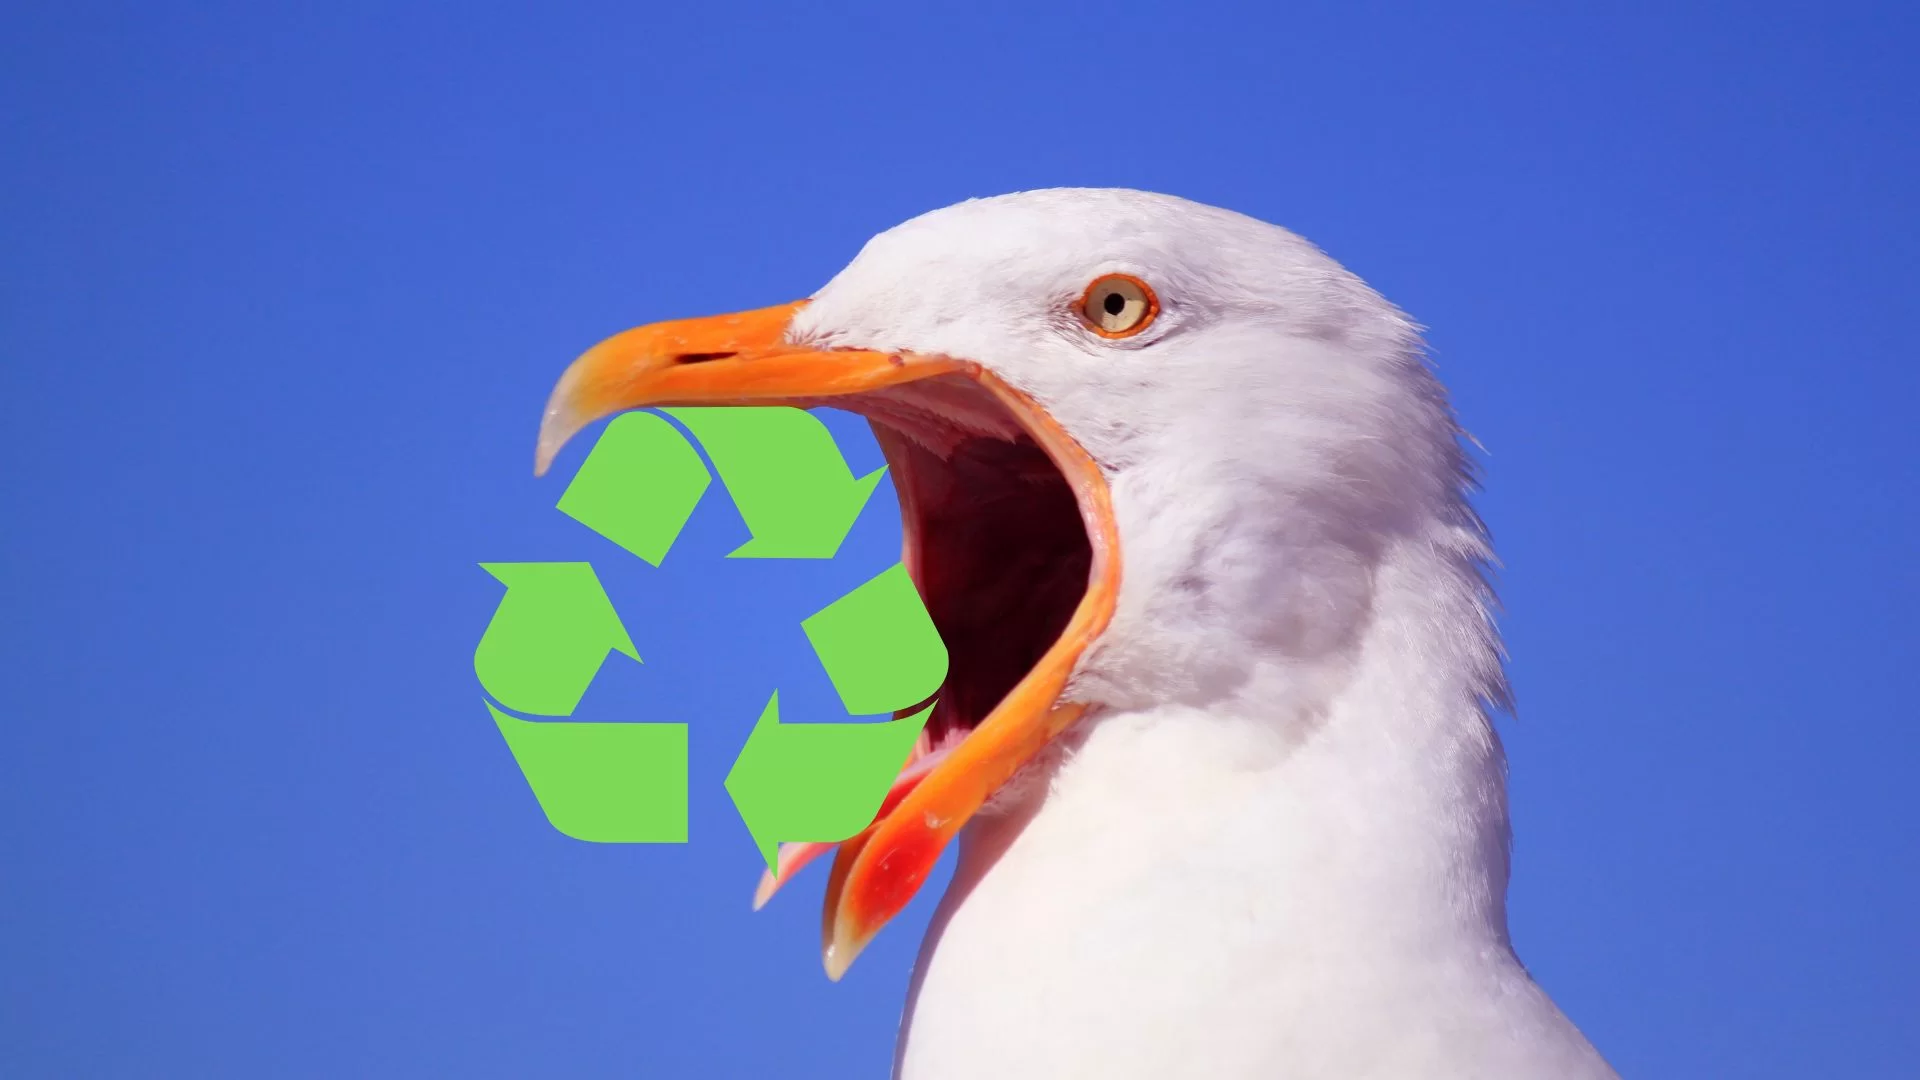 Seagull holding recycling symbol in beak